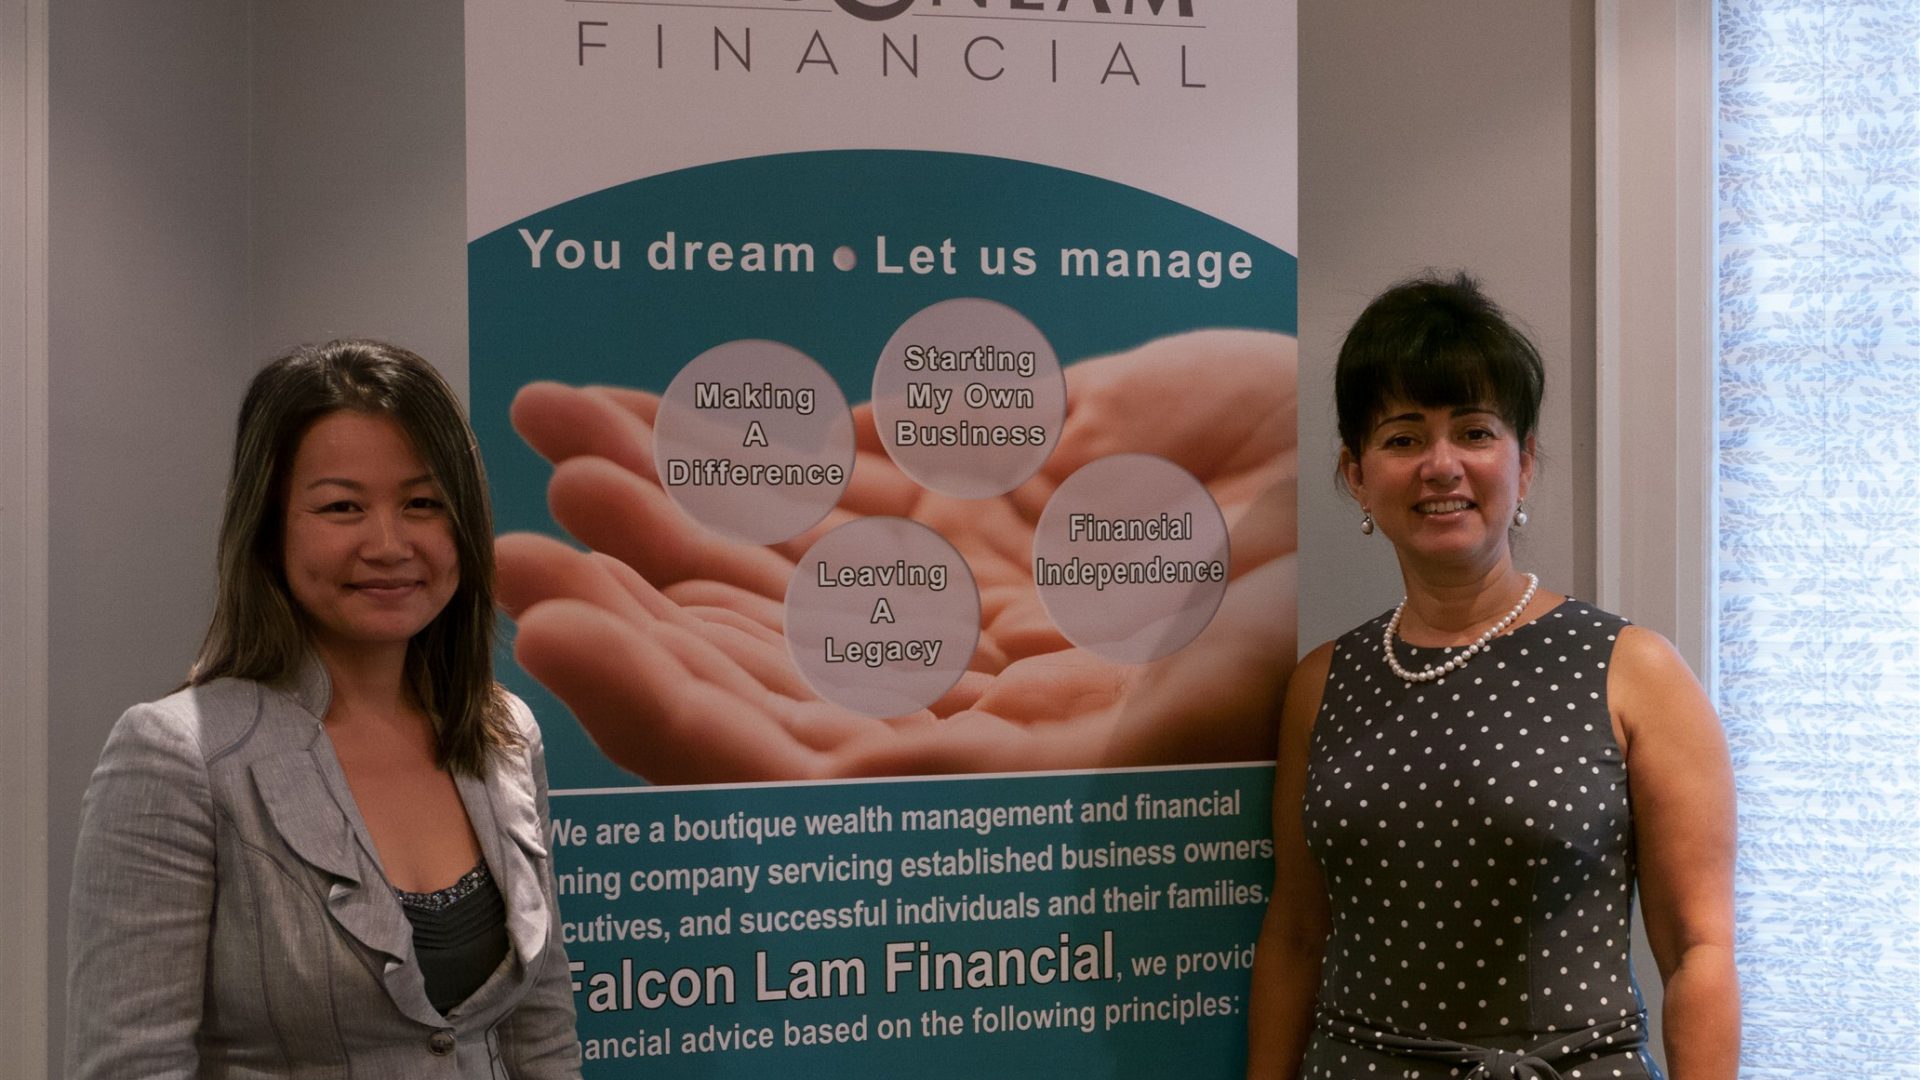 Image of falcon lam employees standing by a banner